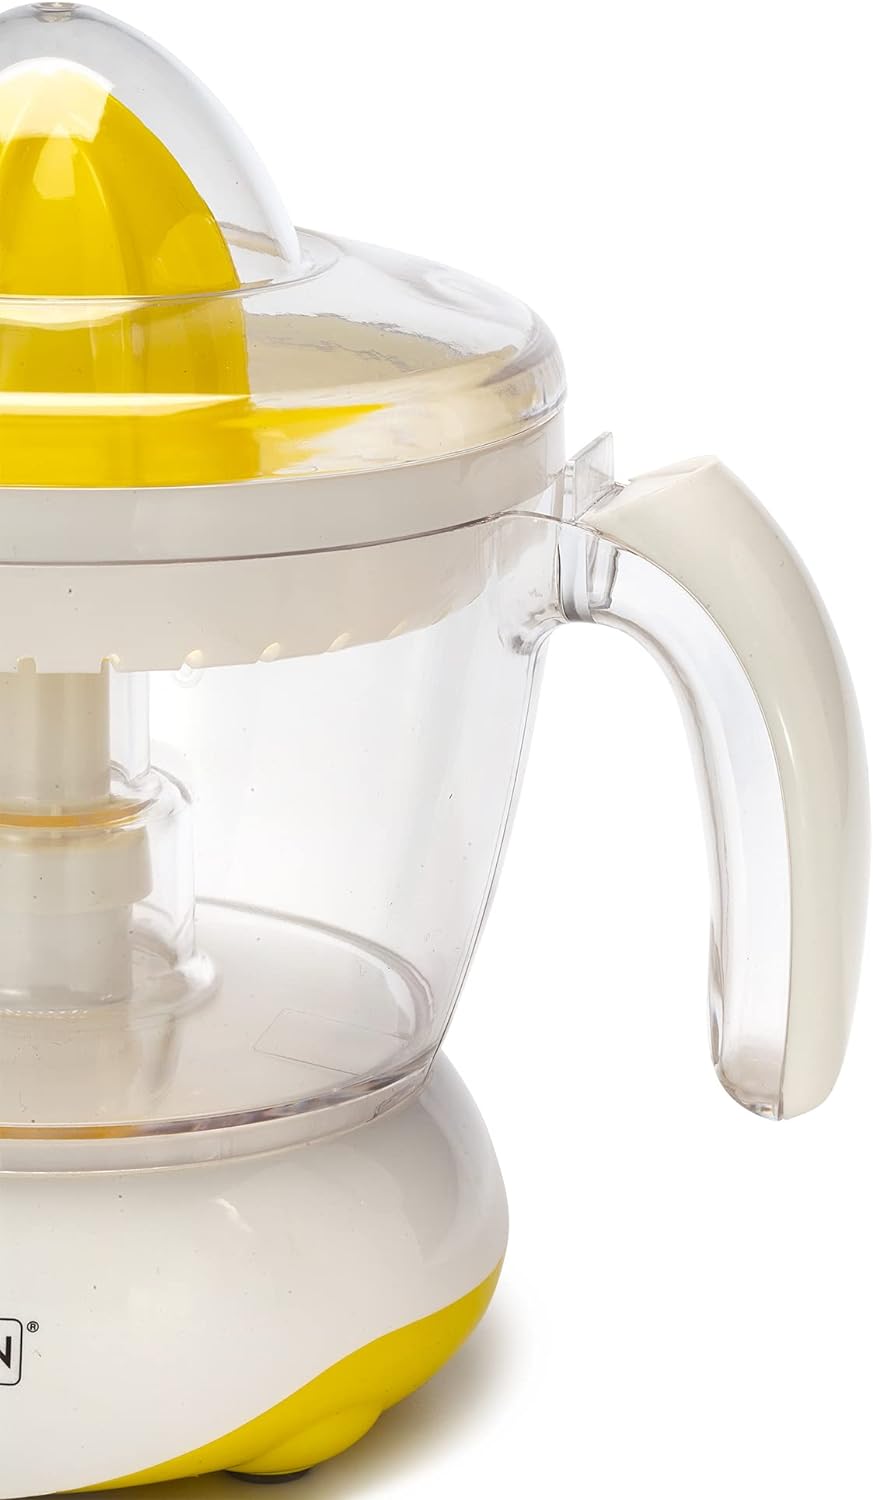 Dominion Citrus Juicer Extractor Review